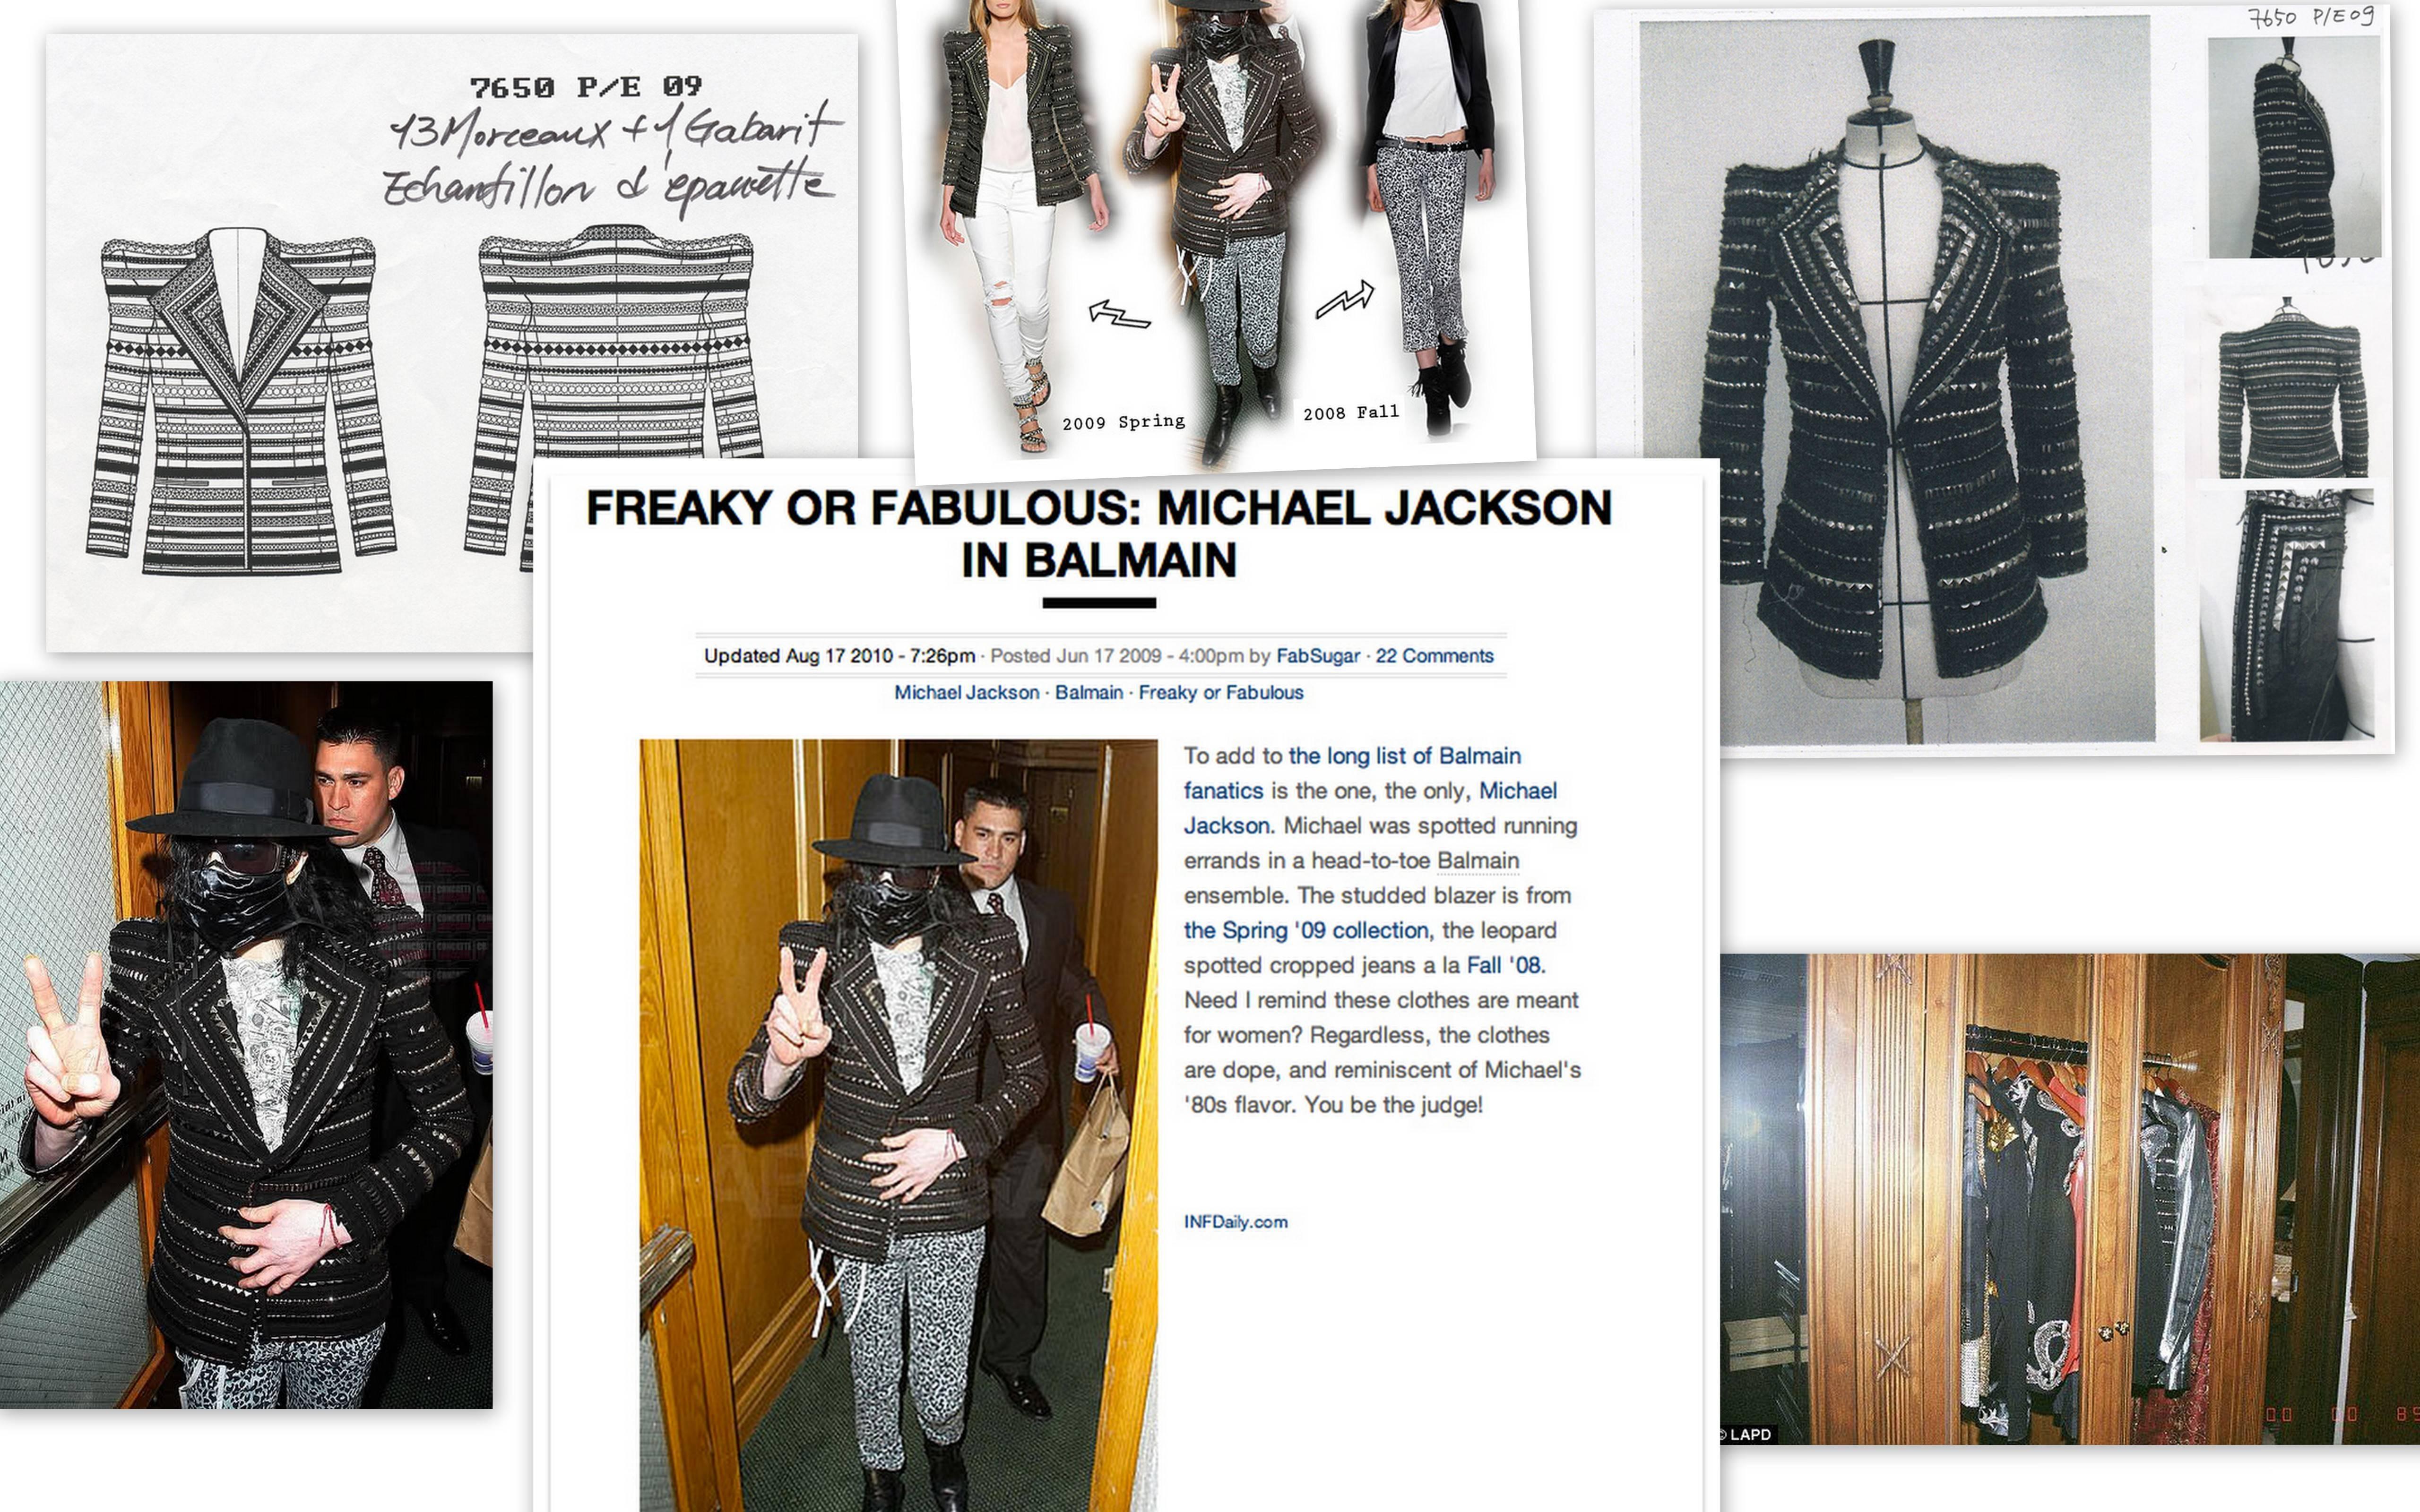 BALMAIN Jacket '09 Runway  Seen And Owned  By  Pop Icon  Michael Jackson  2